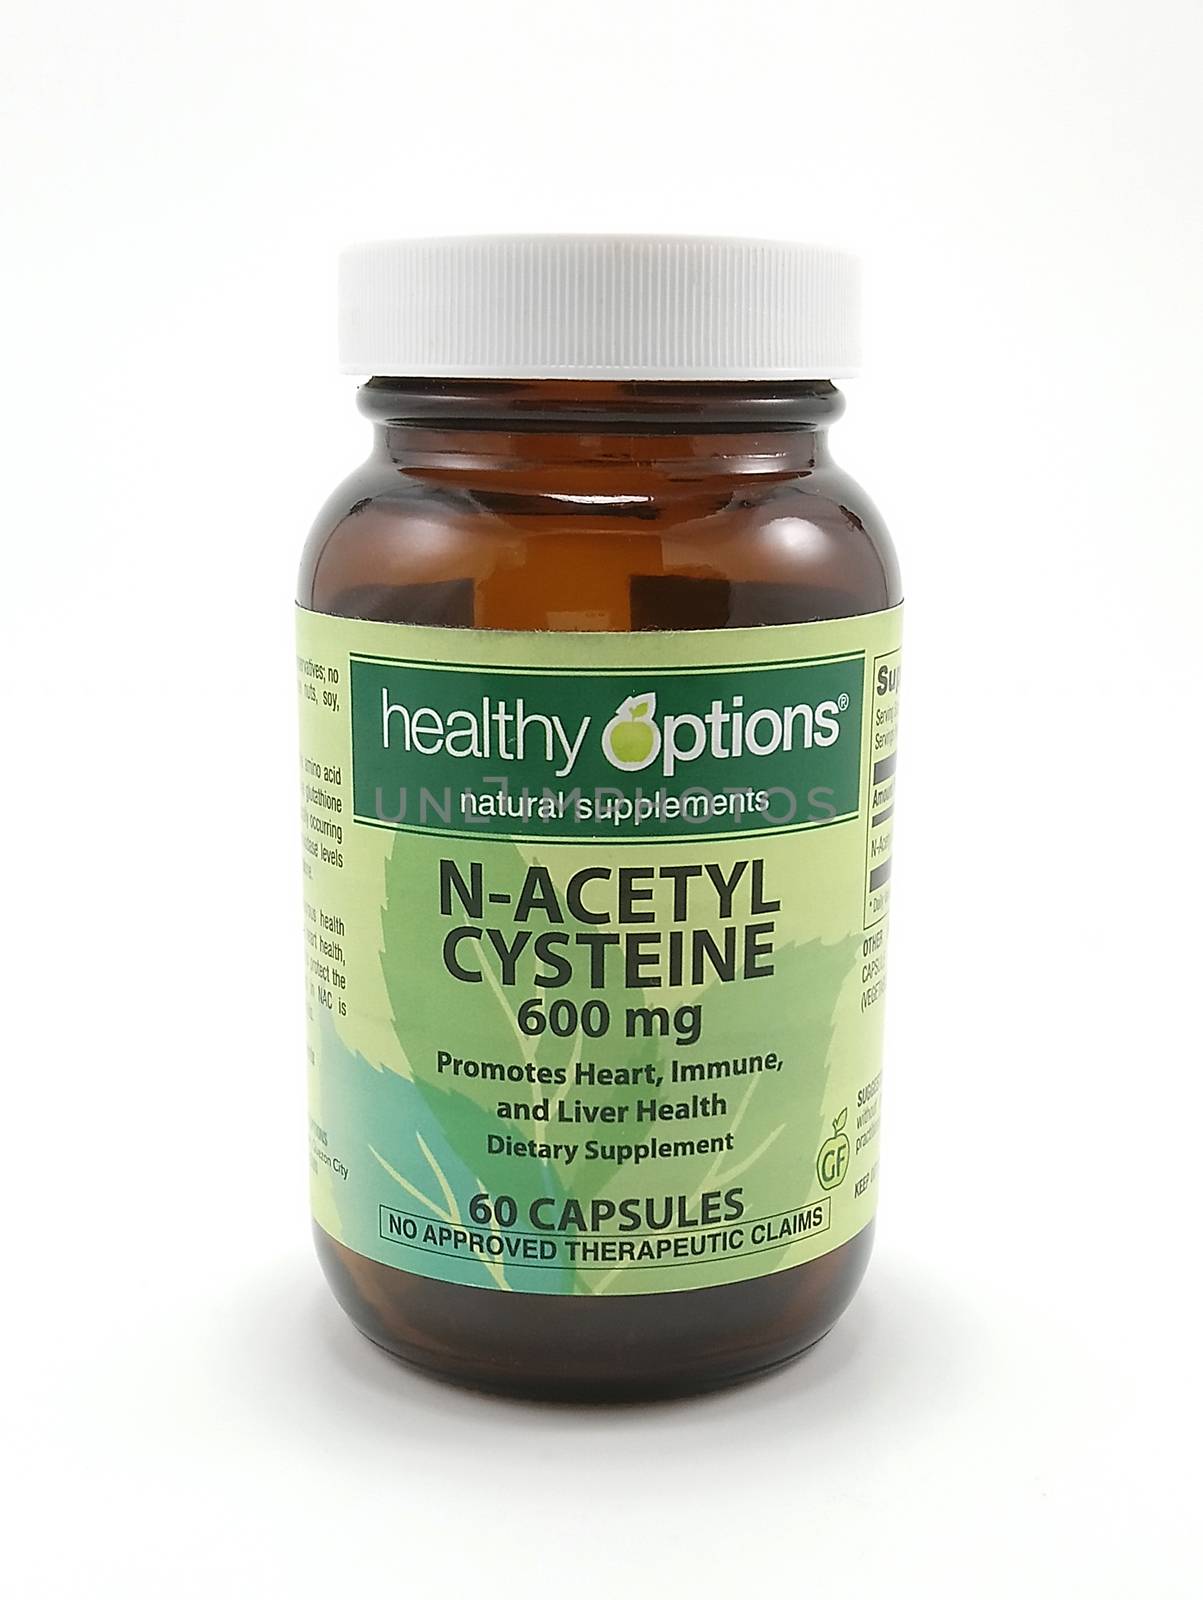 Healthy options n-acetyl cysteine natural supplements in Manila, by imwaltersy